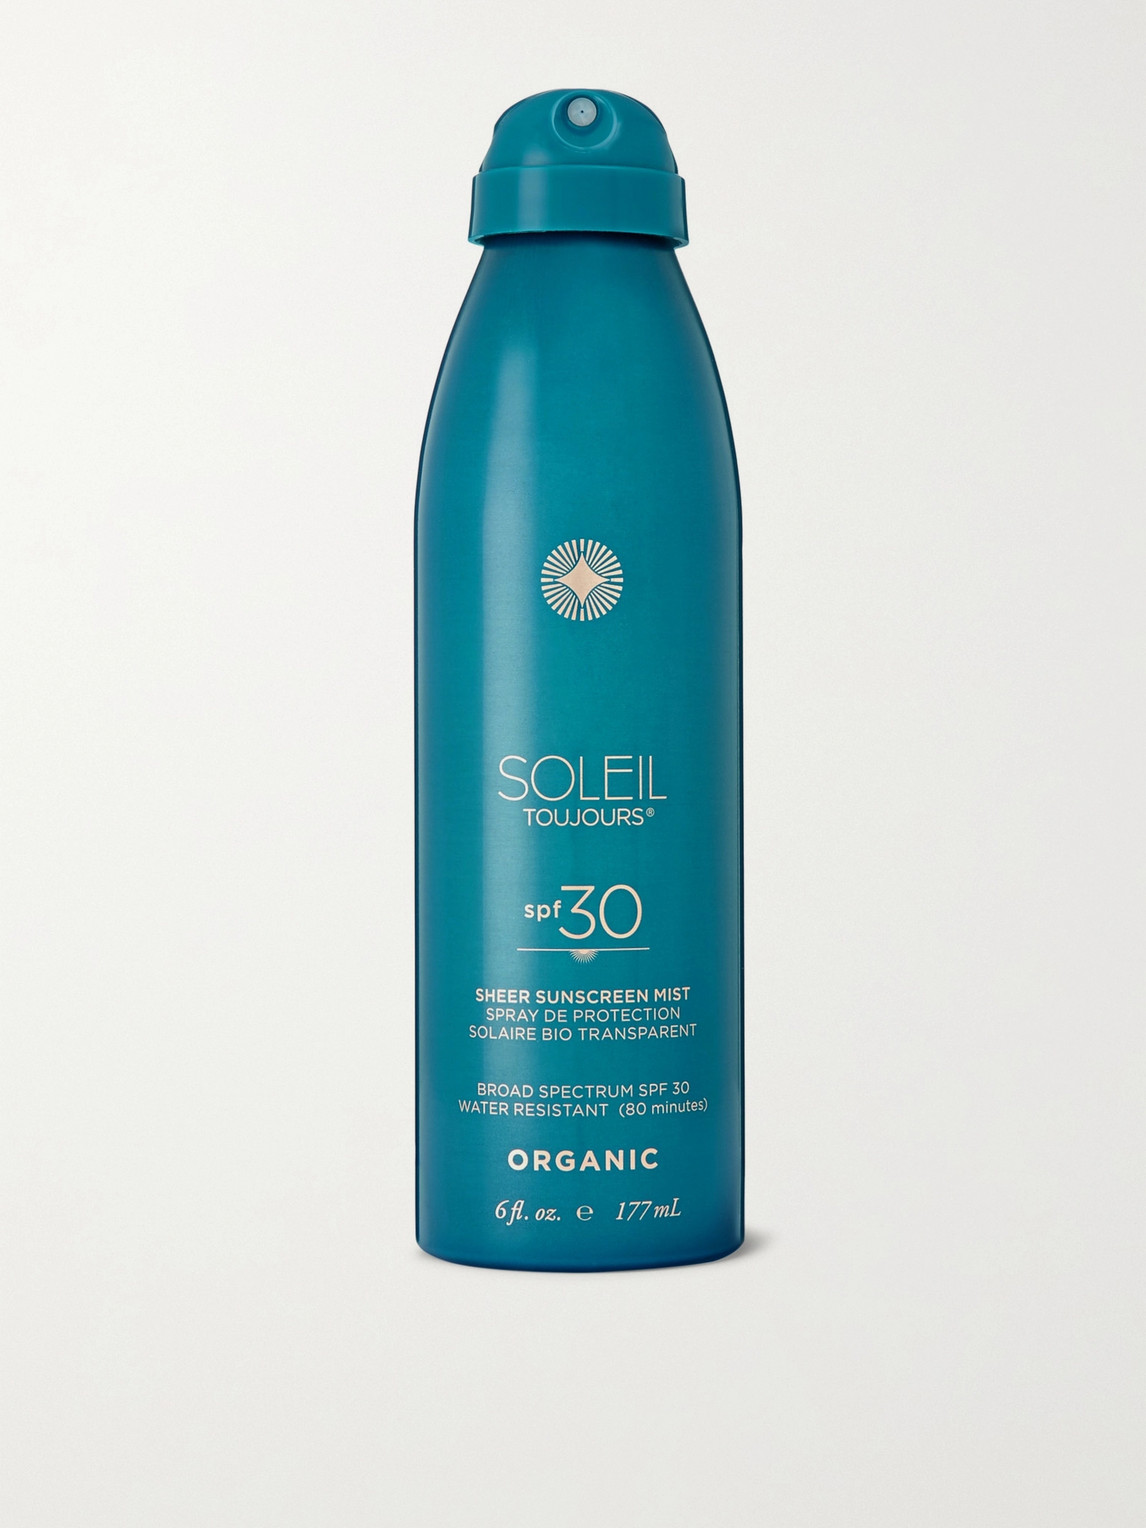 Soleil Toujours Organic Sheer Sunscreen Mist Spf30, 177ml In Colorless